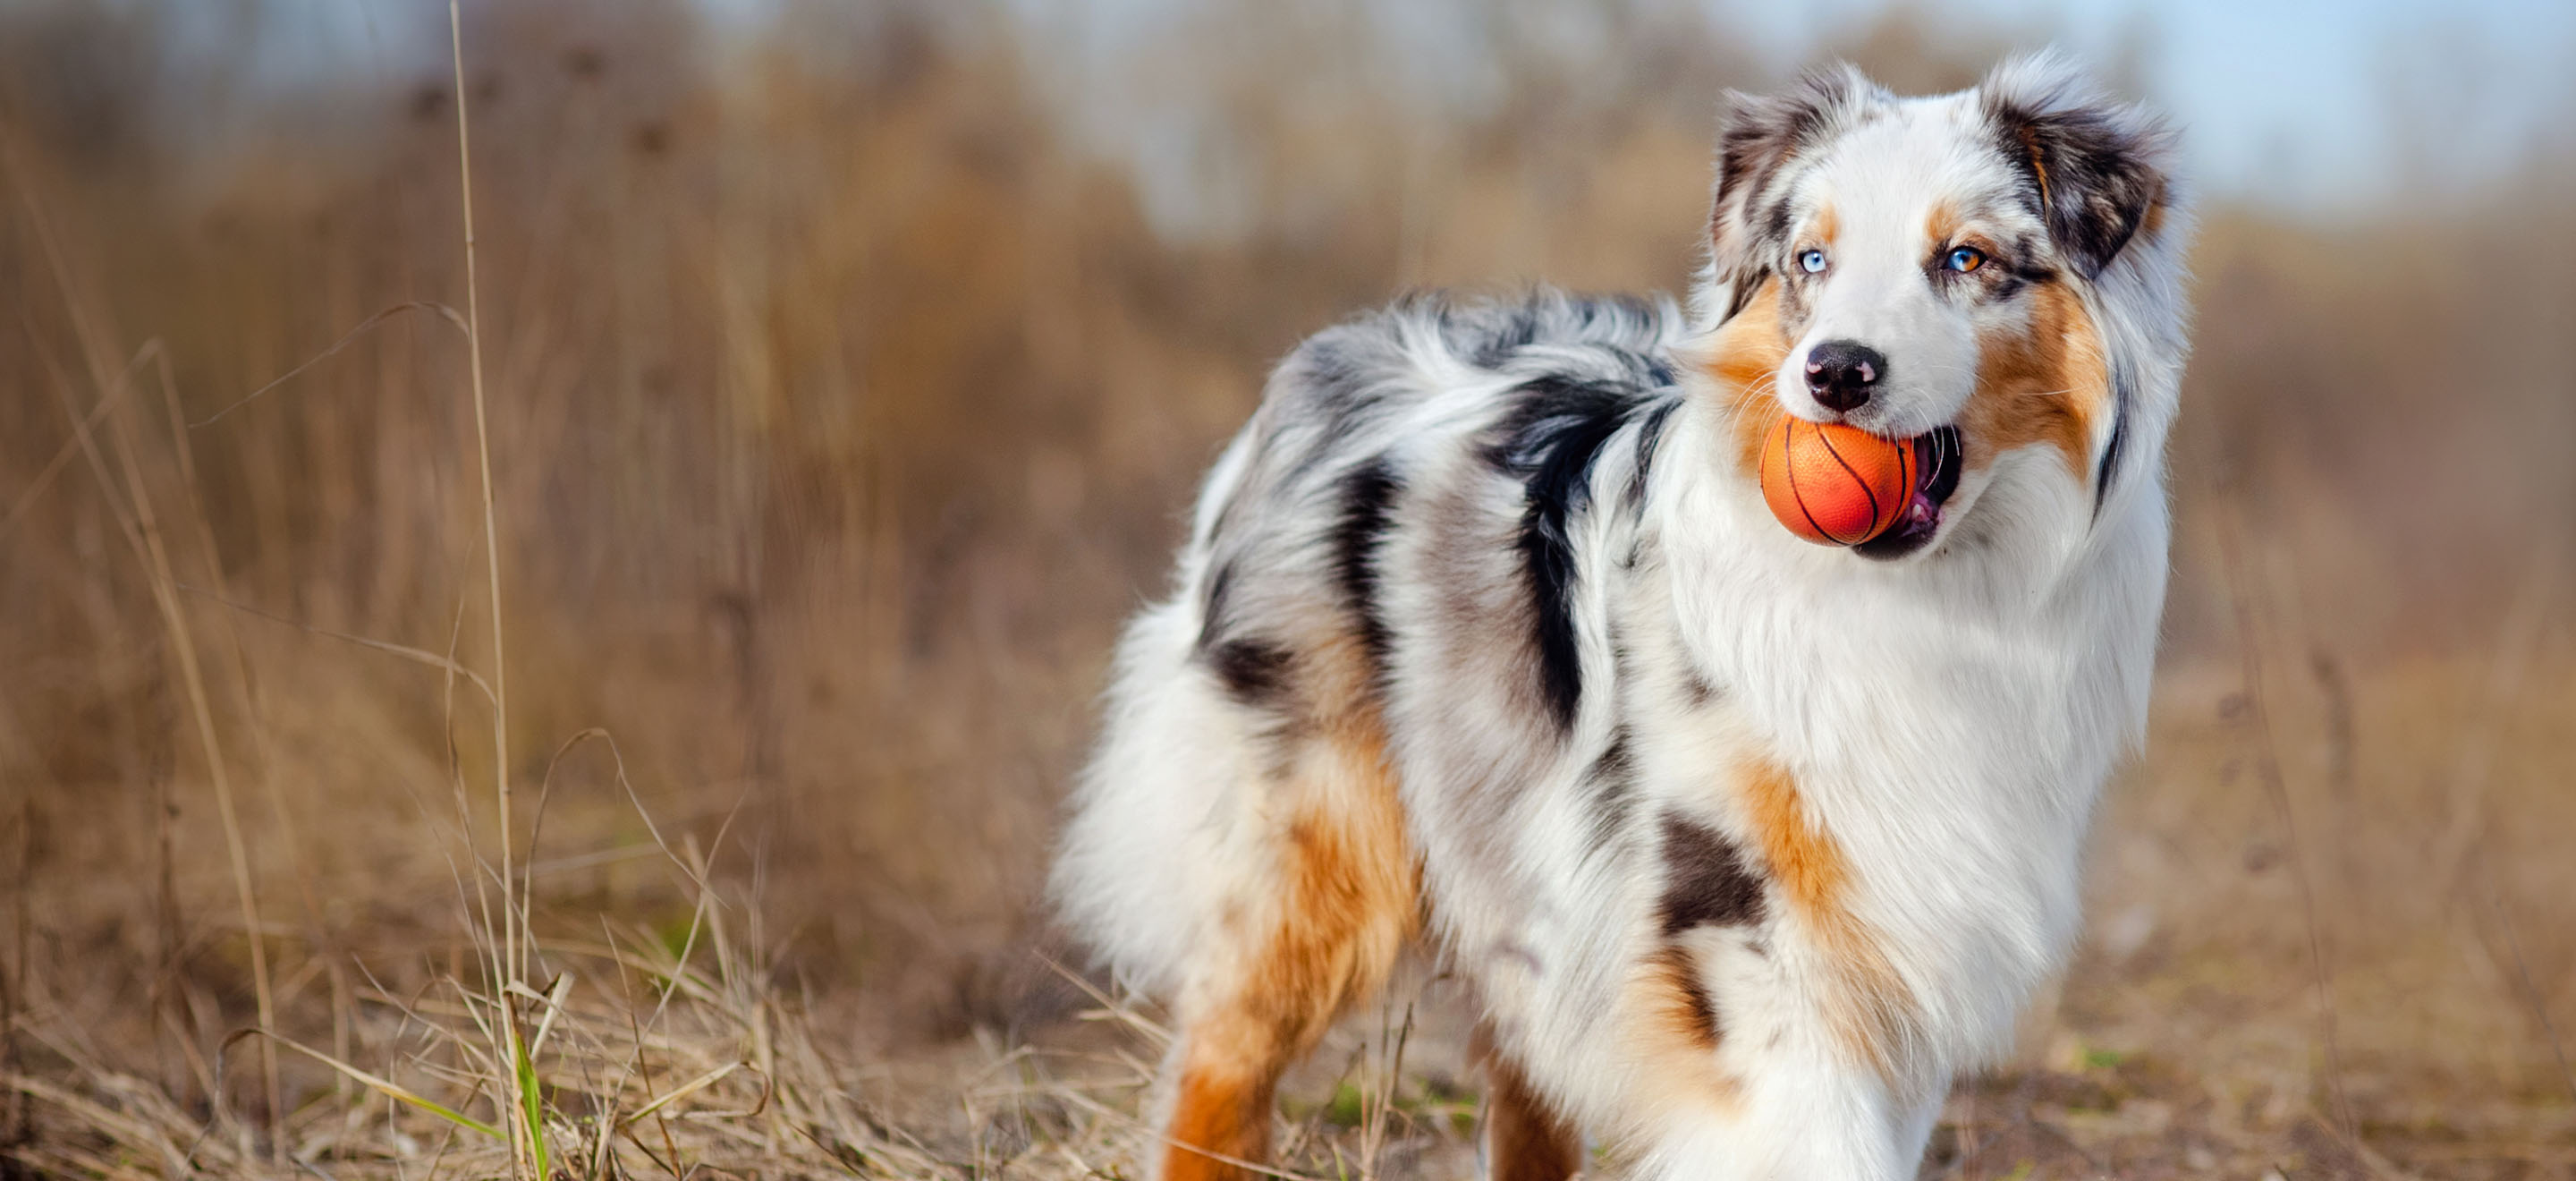 Gray Australian Shepherd with ball in mouth image